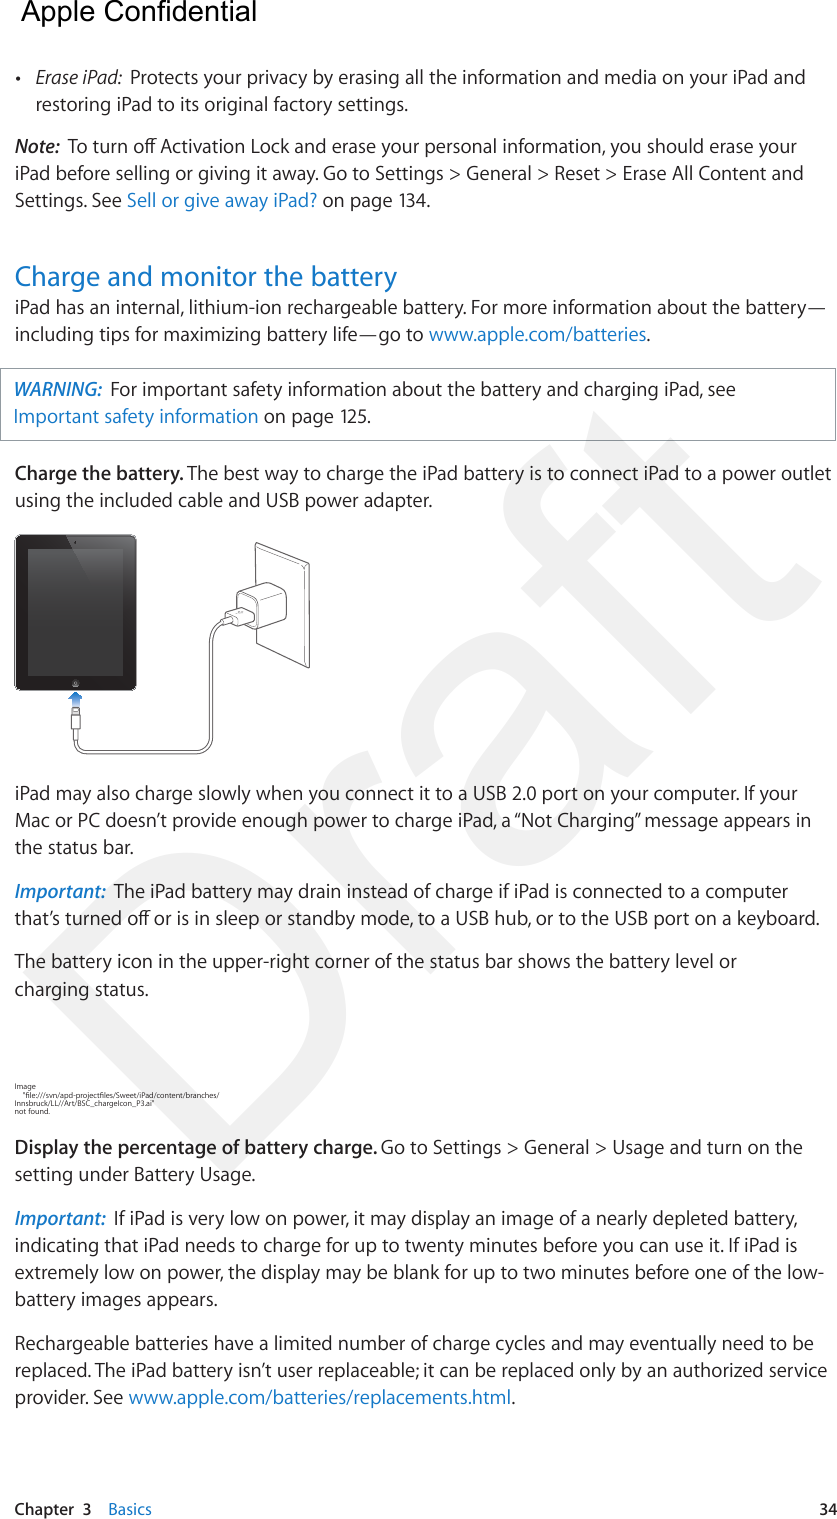 Chapter  3    Basics  34 •Erase iPad:  Protects your privacy by erasing all the information and media on your iPad andrestoring iPad to its original factory settings.Note:  To turn o Activation Lock and erase your personal information, you should erase your iPad before selling or giving it away. Go to Settings &gt; General &gt; Reset &gt; Erase All Content and Settings. See Sell or give away iPad? on page 134.Charge and monitor the batteryiPad has an internal, lithium-ion rechargeable battery. For more information about the battery—including tips for maximizing battery life—go to www.apple.com/batteries. WARNING:  For important safety information about the battery and charging iPad, see Important safety information on page 125. Charge the battery. The best way to charge the iPad battery is to connect iPad to a power outlet using the included cable and USB power adapter. iPad may also charge slowly when you connect it to a USB 2.0 port on your computer. If your Mac or PC doesn’t provide enough power to charge iPad, a “Not Charging” message appears in the status bar. Important:  The iPad battery may drain instead of charge if iPad is connected to a computer that’s turned o or is in sleep or standby mode, to a USB hub, or to the USB port on a keyboard.The battery icon in the upper-right corner of the status bar shows the battery level or charging status.Image     &quot;le:///svn/apd-projectles/Sweet/iPad/content/branches/Innsbruck/LL//Art/BSC_chargeIcon_P3.ai&quot; not found.Display the percentage of battery charge. Go to Settings &gt; General &gt; Usage and turn on the setting under Battery Usage.Important:  If iPad is very low on power, it may display an image of a nearly depleted battery, indicating that iPad needs to charge for up to twenty minutes before you can use it. If iPad is extremely low on power, the display may be blank for up to two minutes before one of the low-battery images appears.Rechargeable batteries have a limited number of charge cycles and may eventually need to be replaced. The iPad battery isn’t user replaceable; it can be replaced only by an authorized service provider. See www.apple.com/batteries/replacements.html.  Apple Confidential Draft